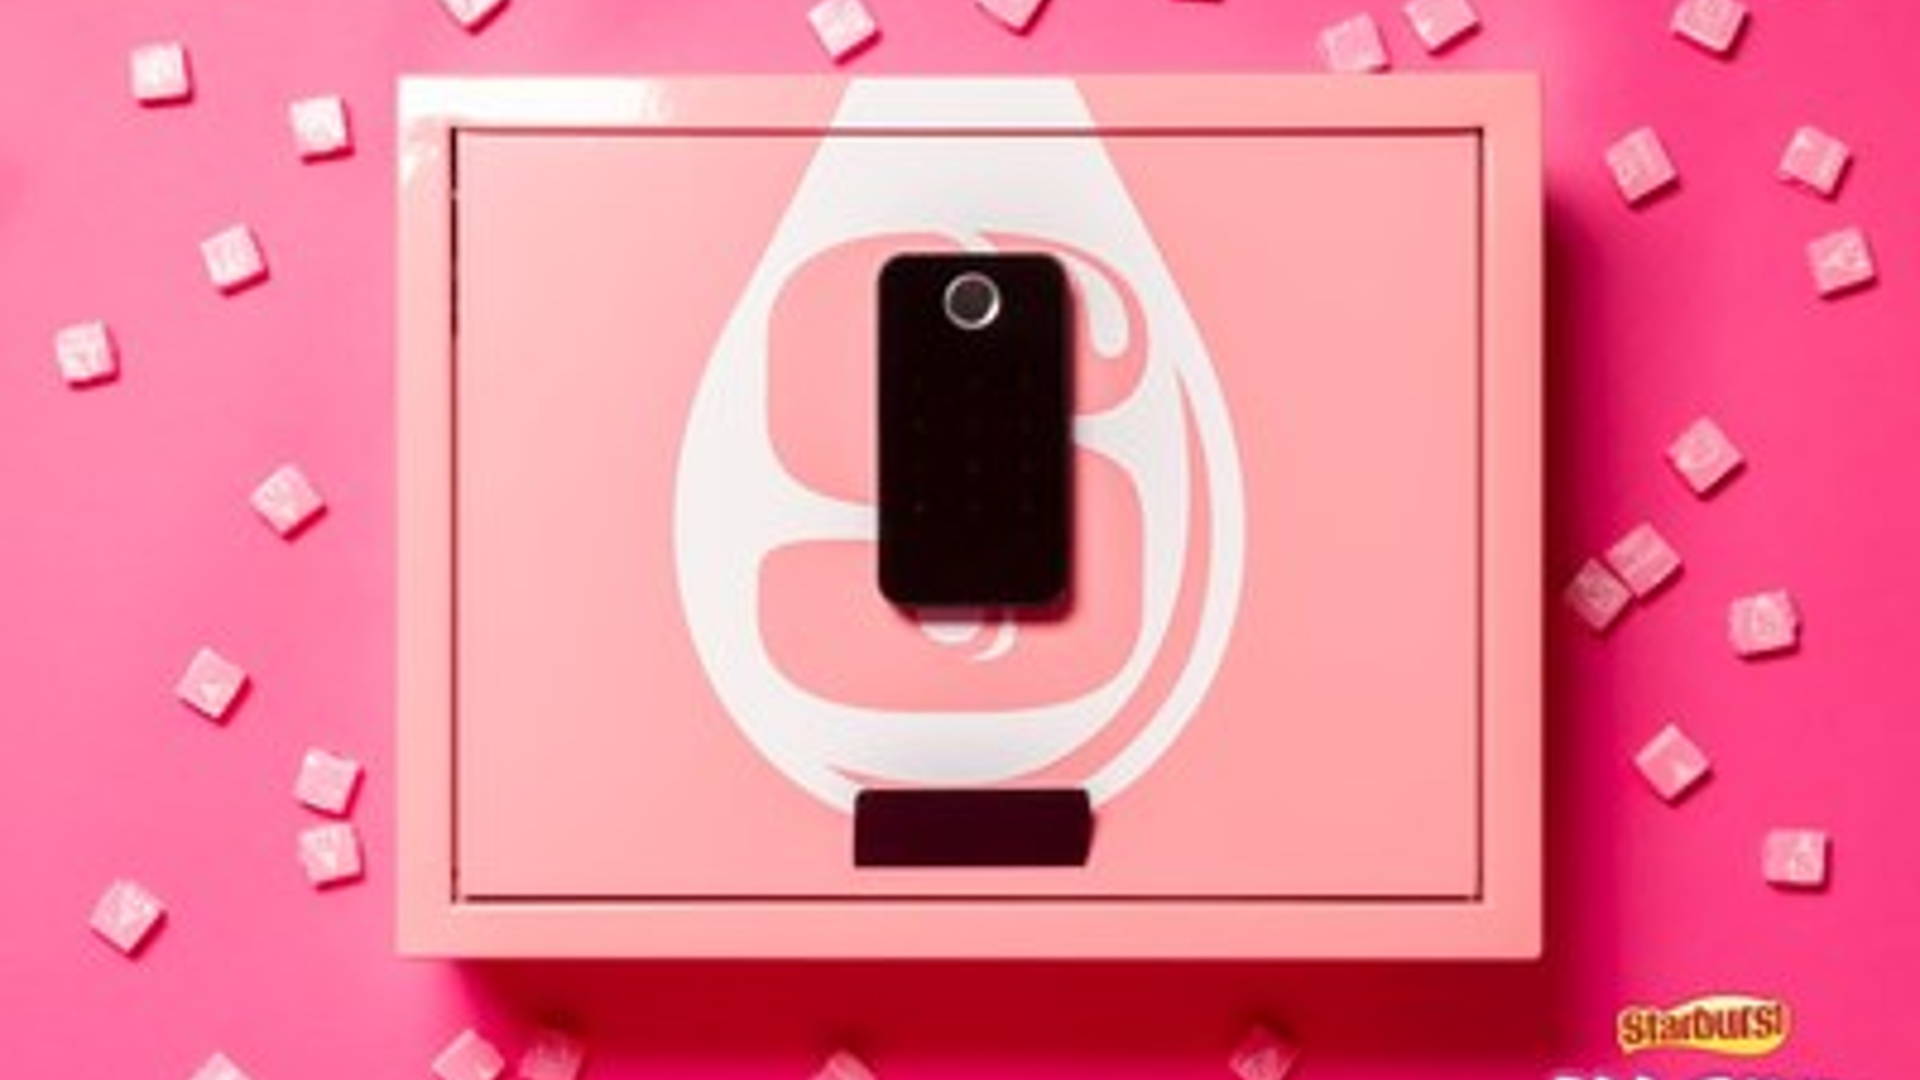 Featured image for You Are A Pink Starburst And Now You Can Protect Your Candies With A Biometric Fingerprint Locked Safe